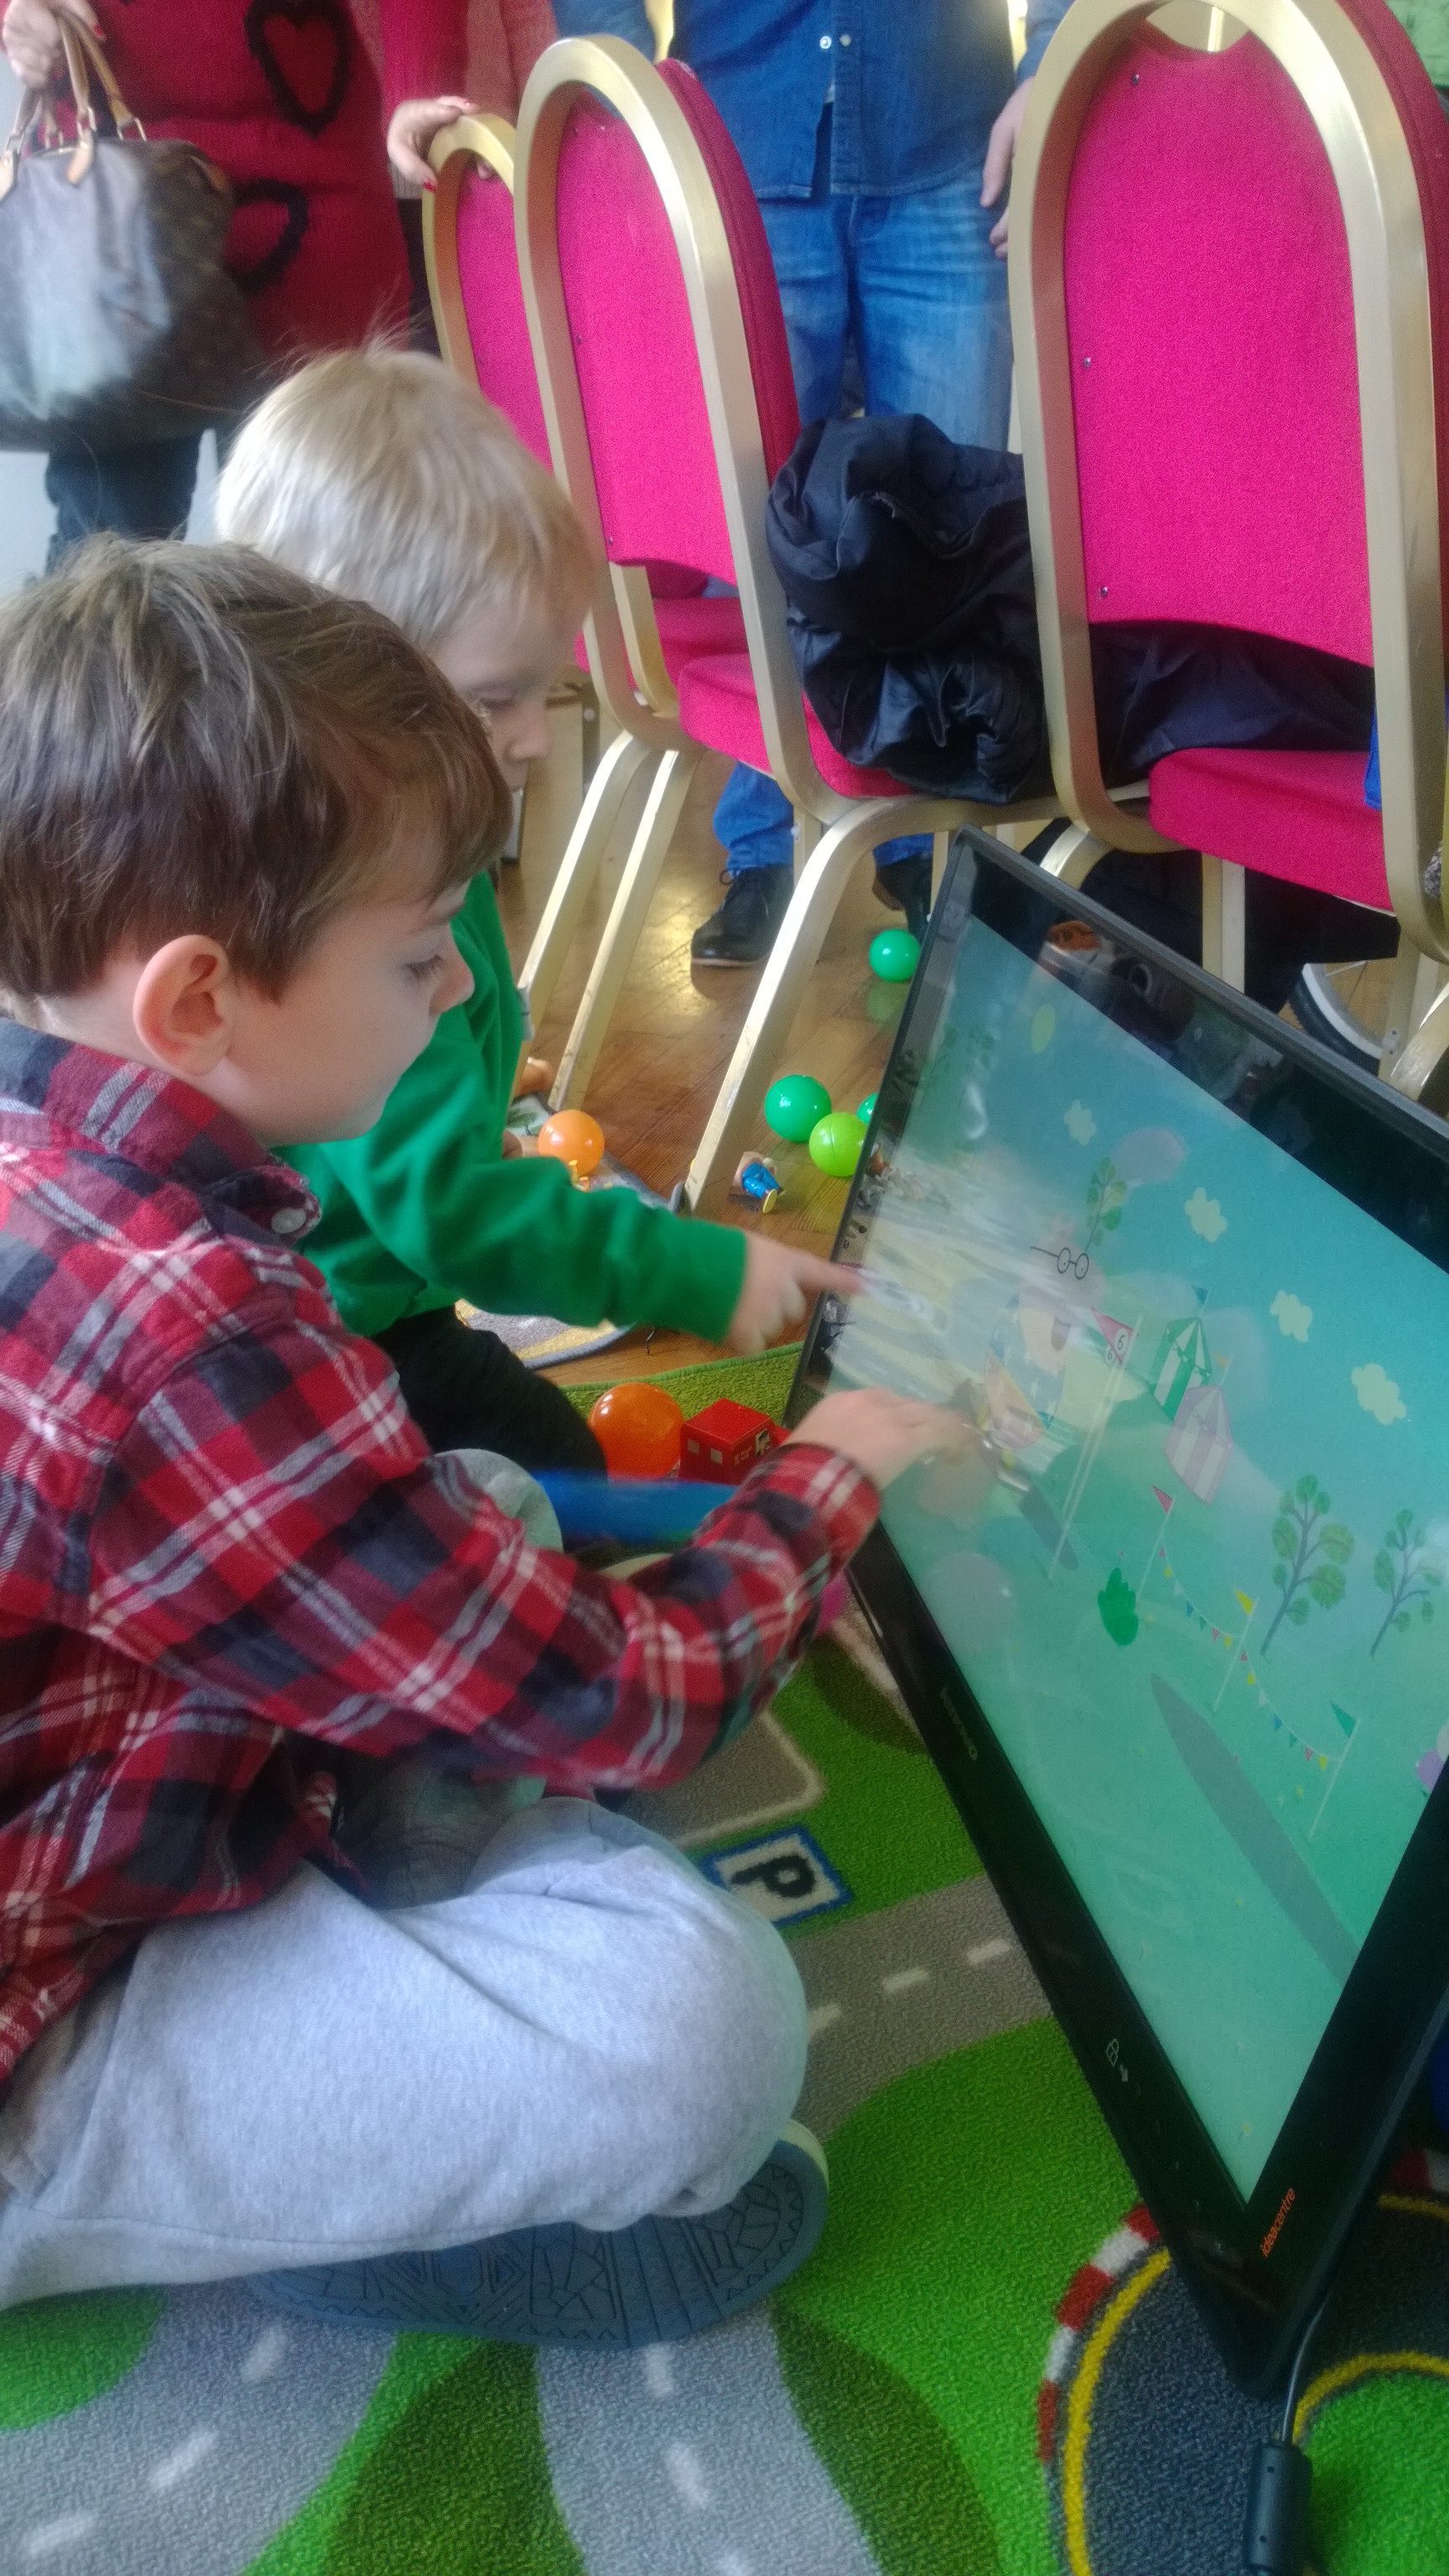 Children playing the new Peppa Pig app